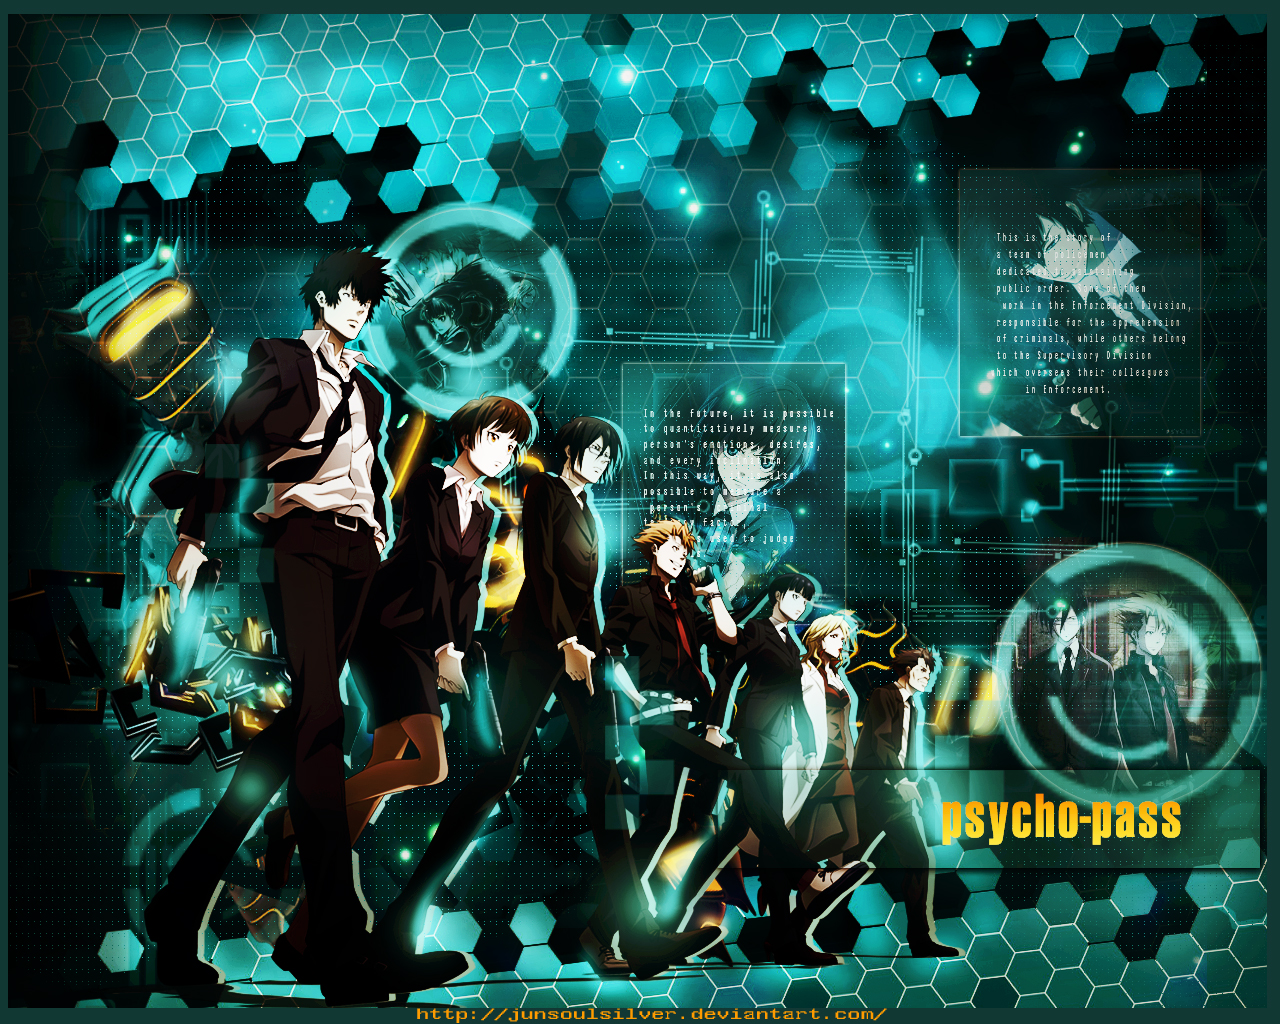 Free Download Psycho Pass Wallpaper By Junsoulsilver 1280x1024 For Your Desktop Mobile Tablet Explore 49 Psycho Pass Wallpaper Psycho Wallpaper Psycho Pass Wallpaper Hd